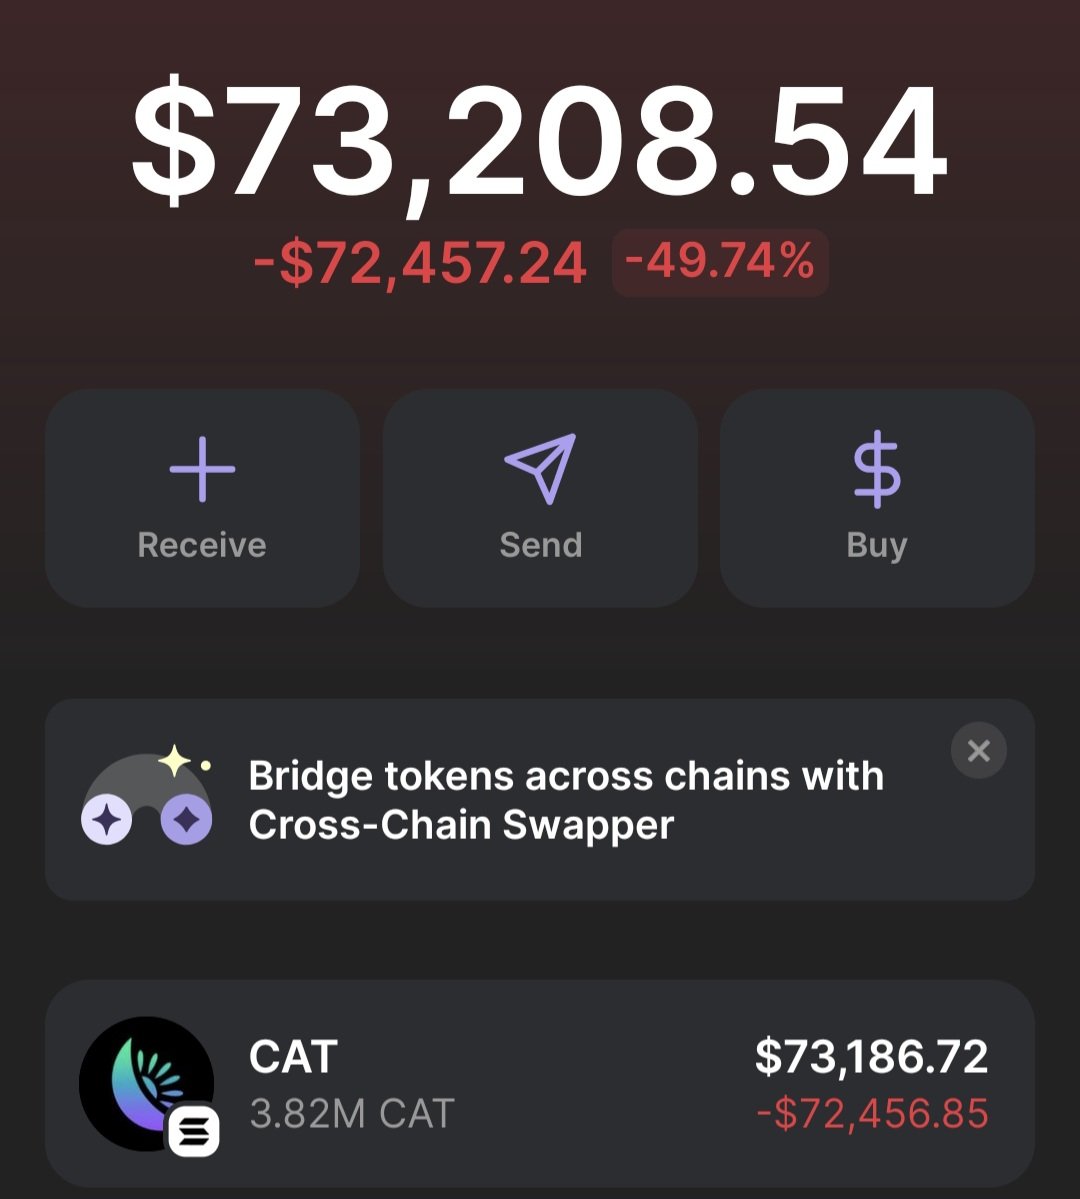 $CAT WILL PUSH BIG 🔥👀 EITHER I MAKE MILLIONS OR ZERO M BIDDING MORE ON $CAT !